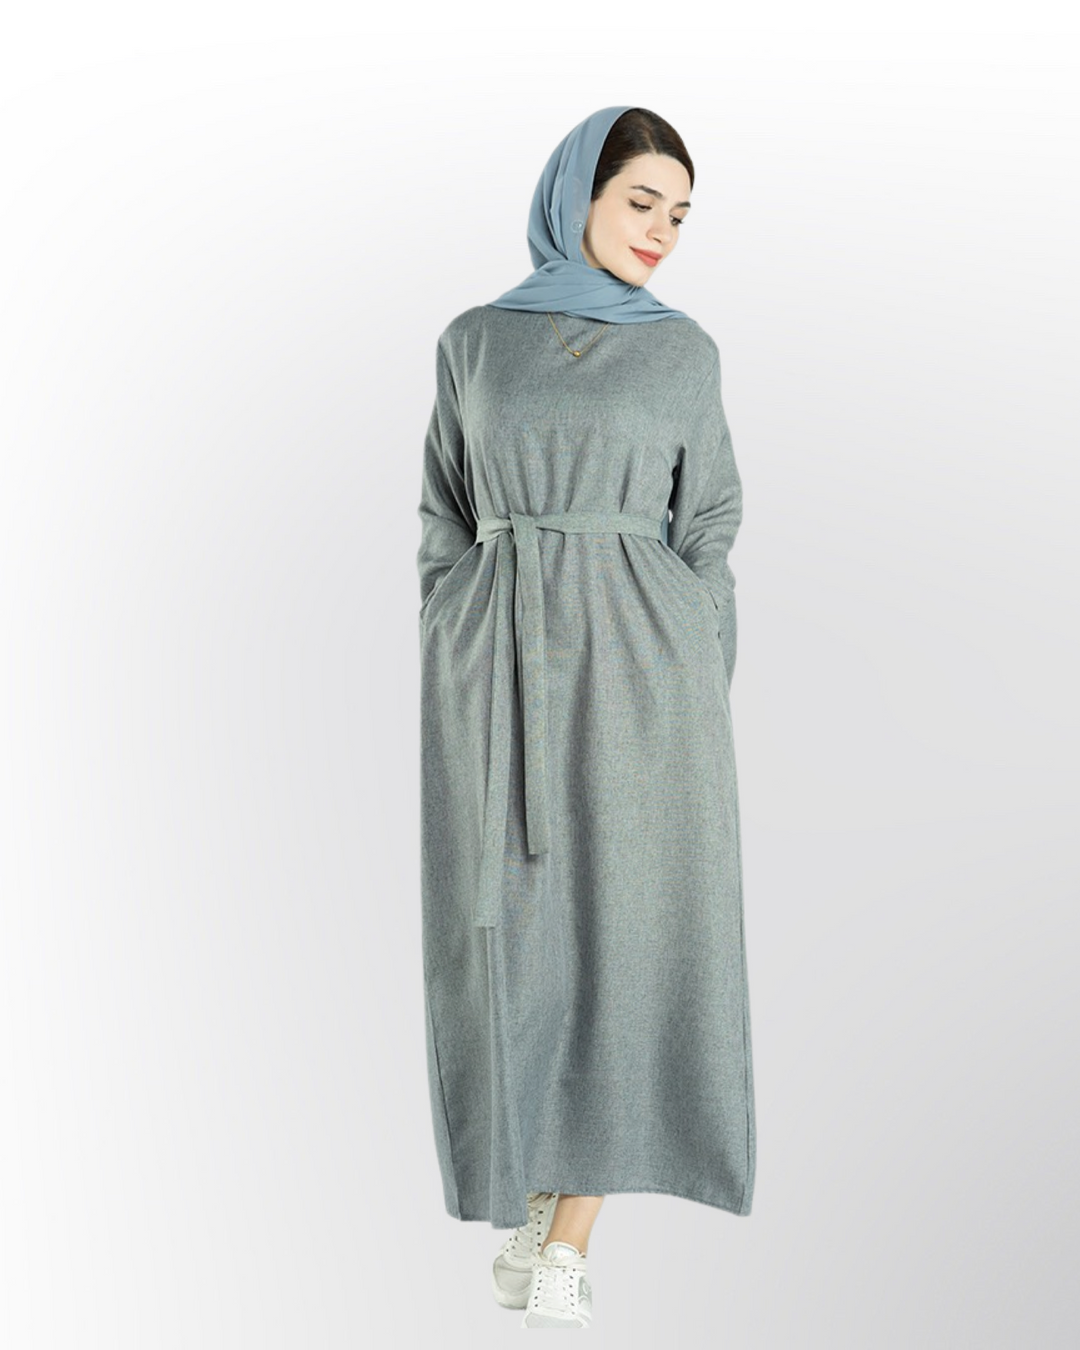 Get trendy with Elora Linen Set - Gray - Dresses available at Voilee NY. Grab yours for $99.90 today!